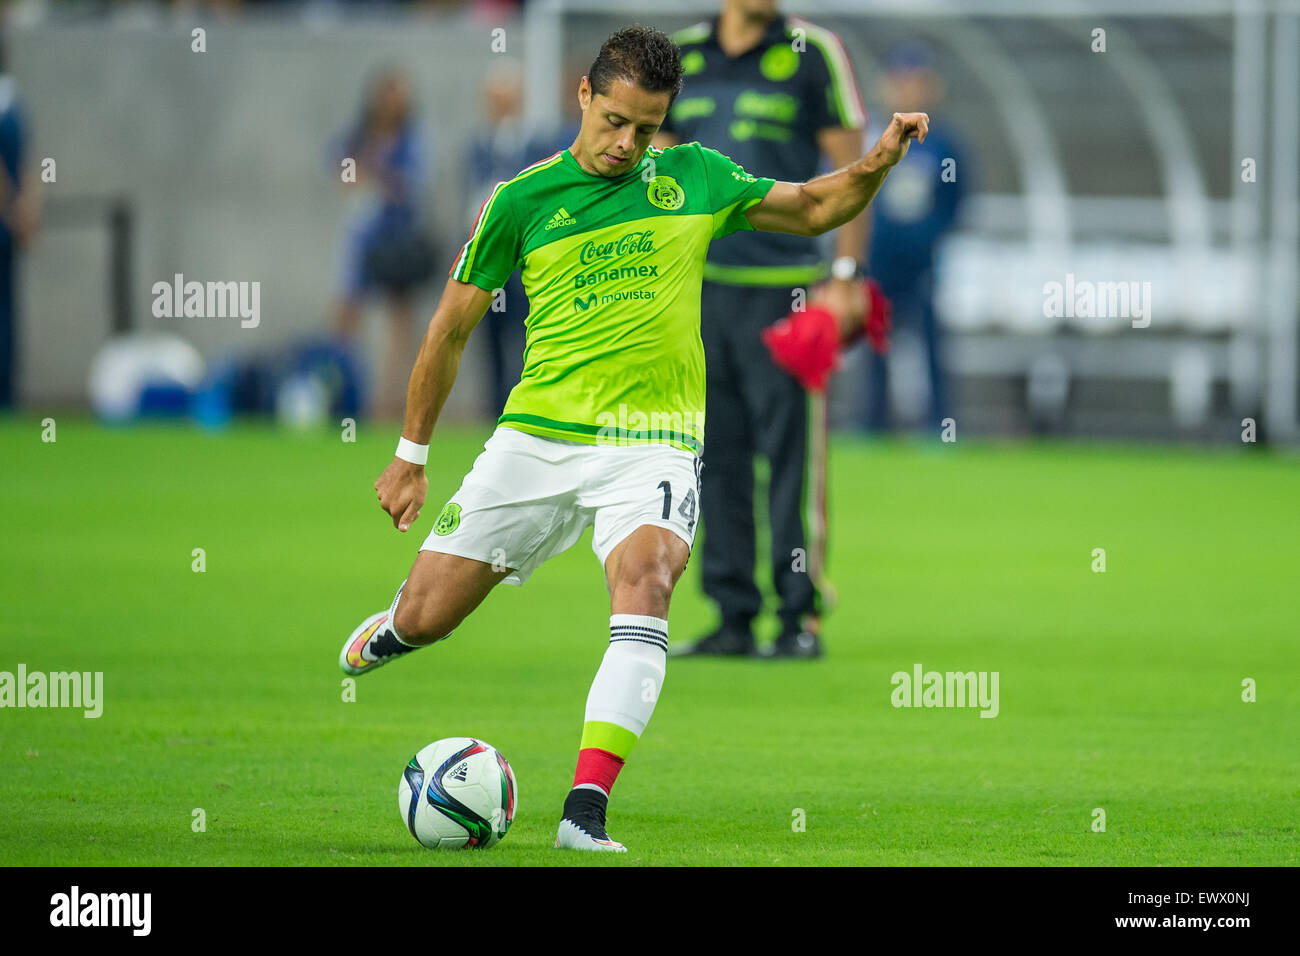 Houston, TX, USA. 1st July, 2015. Mexico forward Javier Hernandez (14) warms up prior to an international soccer match between Honduras and Mexico at NRG Stadium in Houston, TX. Trask Smith/CSM/Alamy Live News Stock Photo